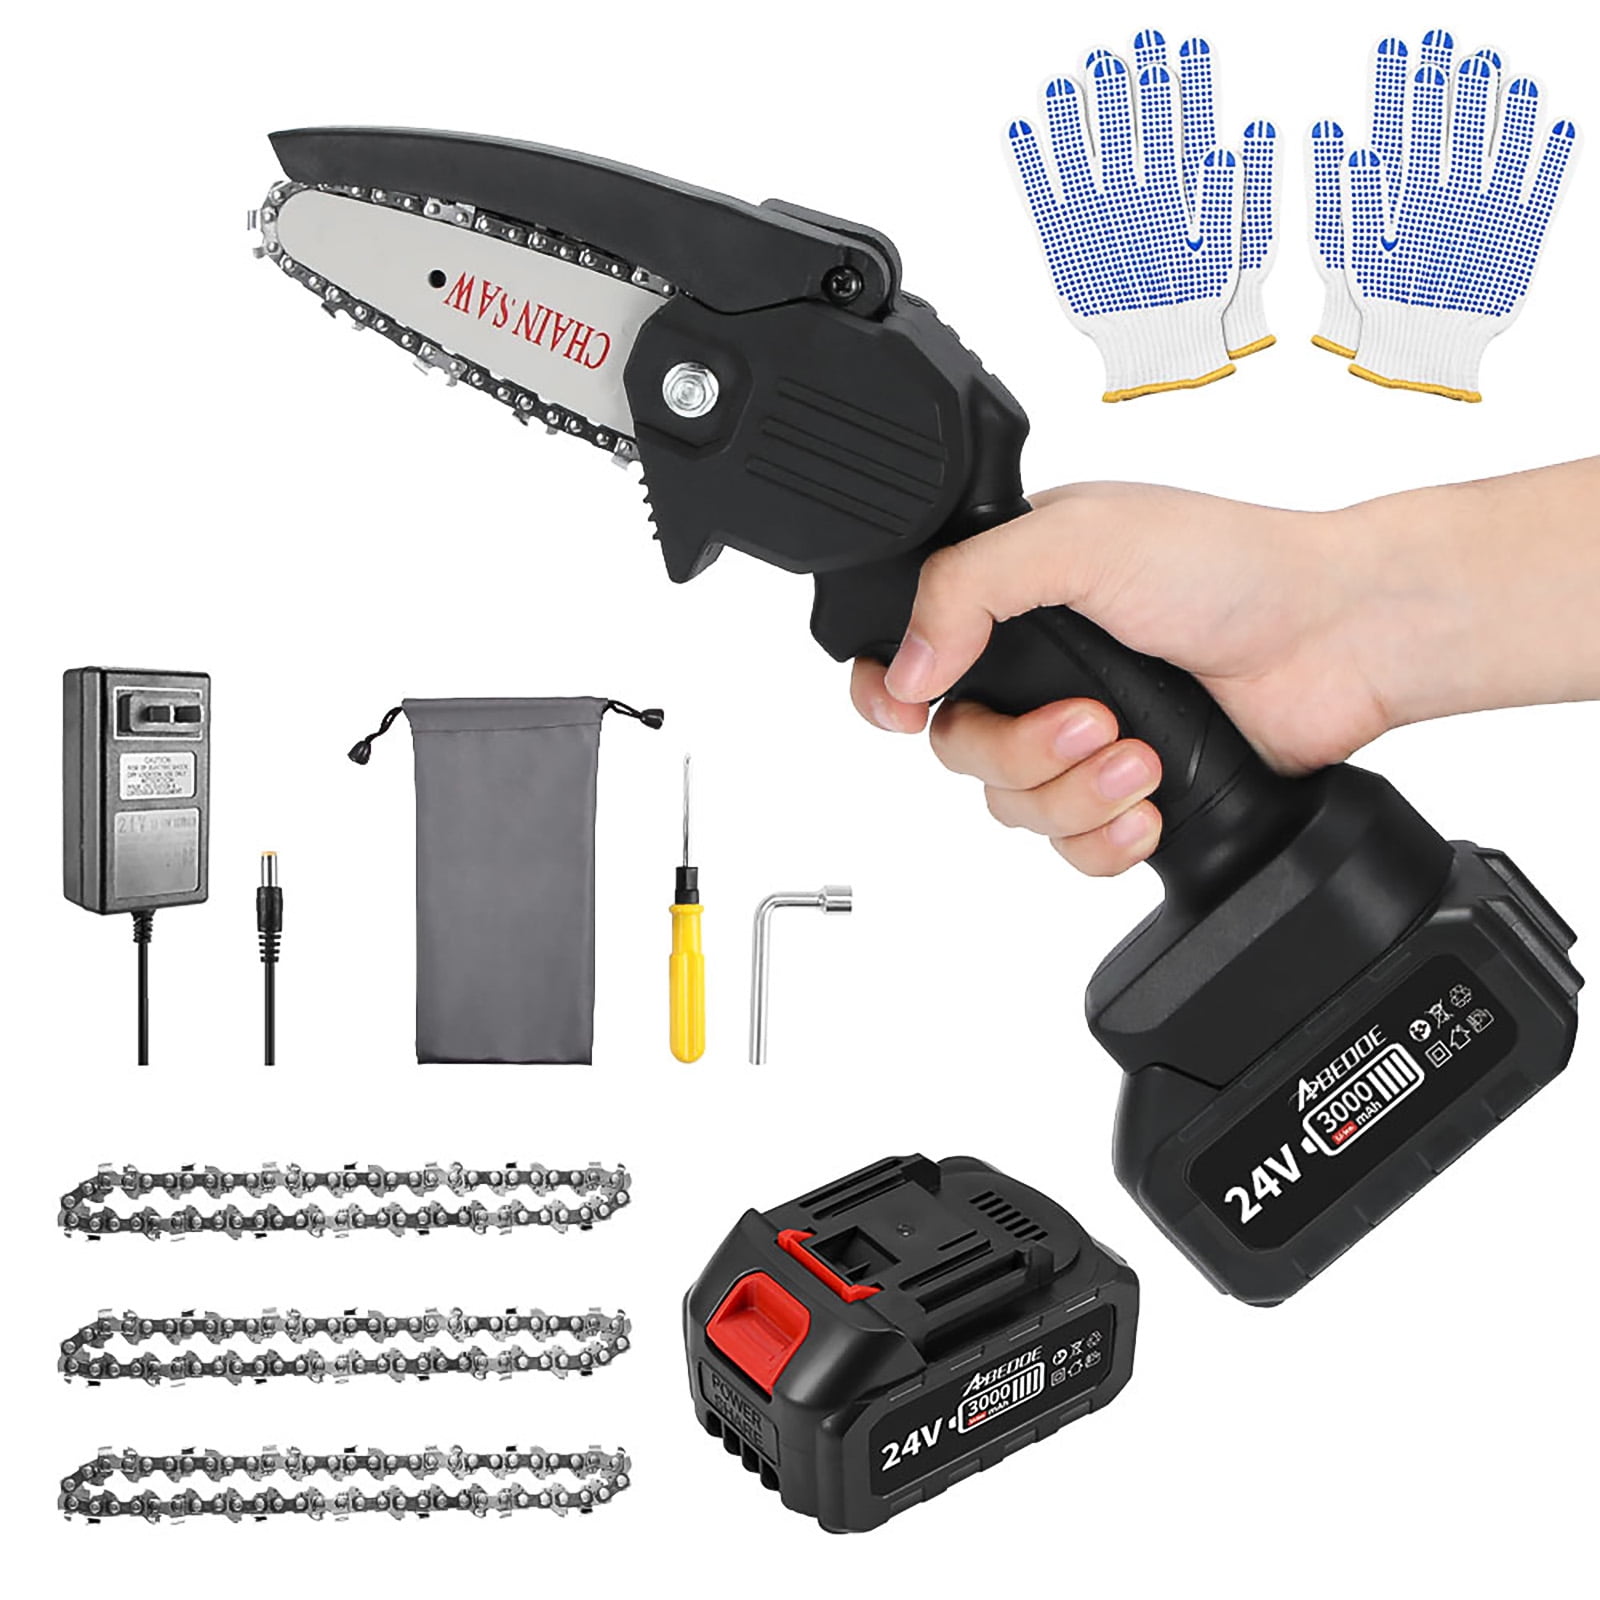 Details about   Portable Chain Saw 24V Battery For Electric Pruning High Quality And Durable Kit